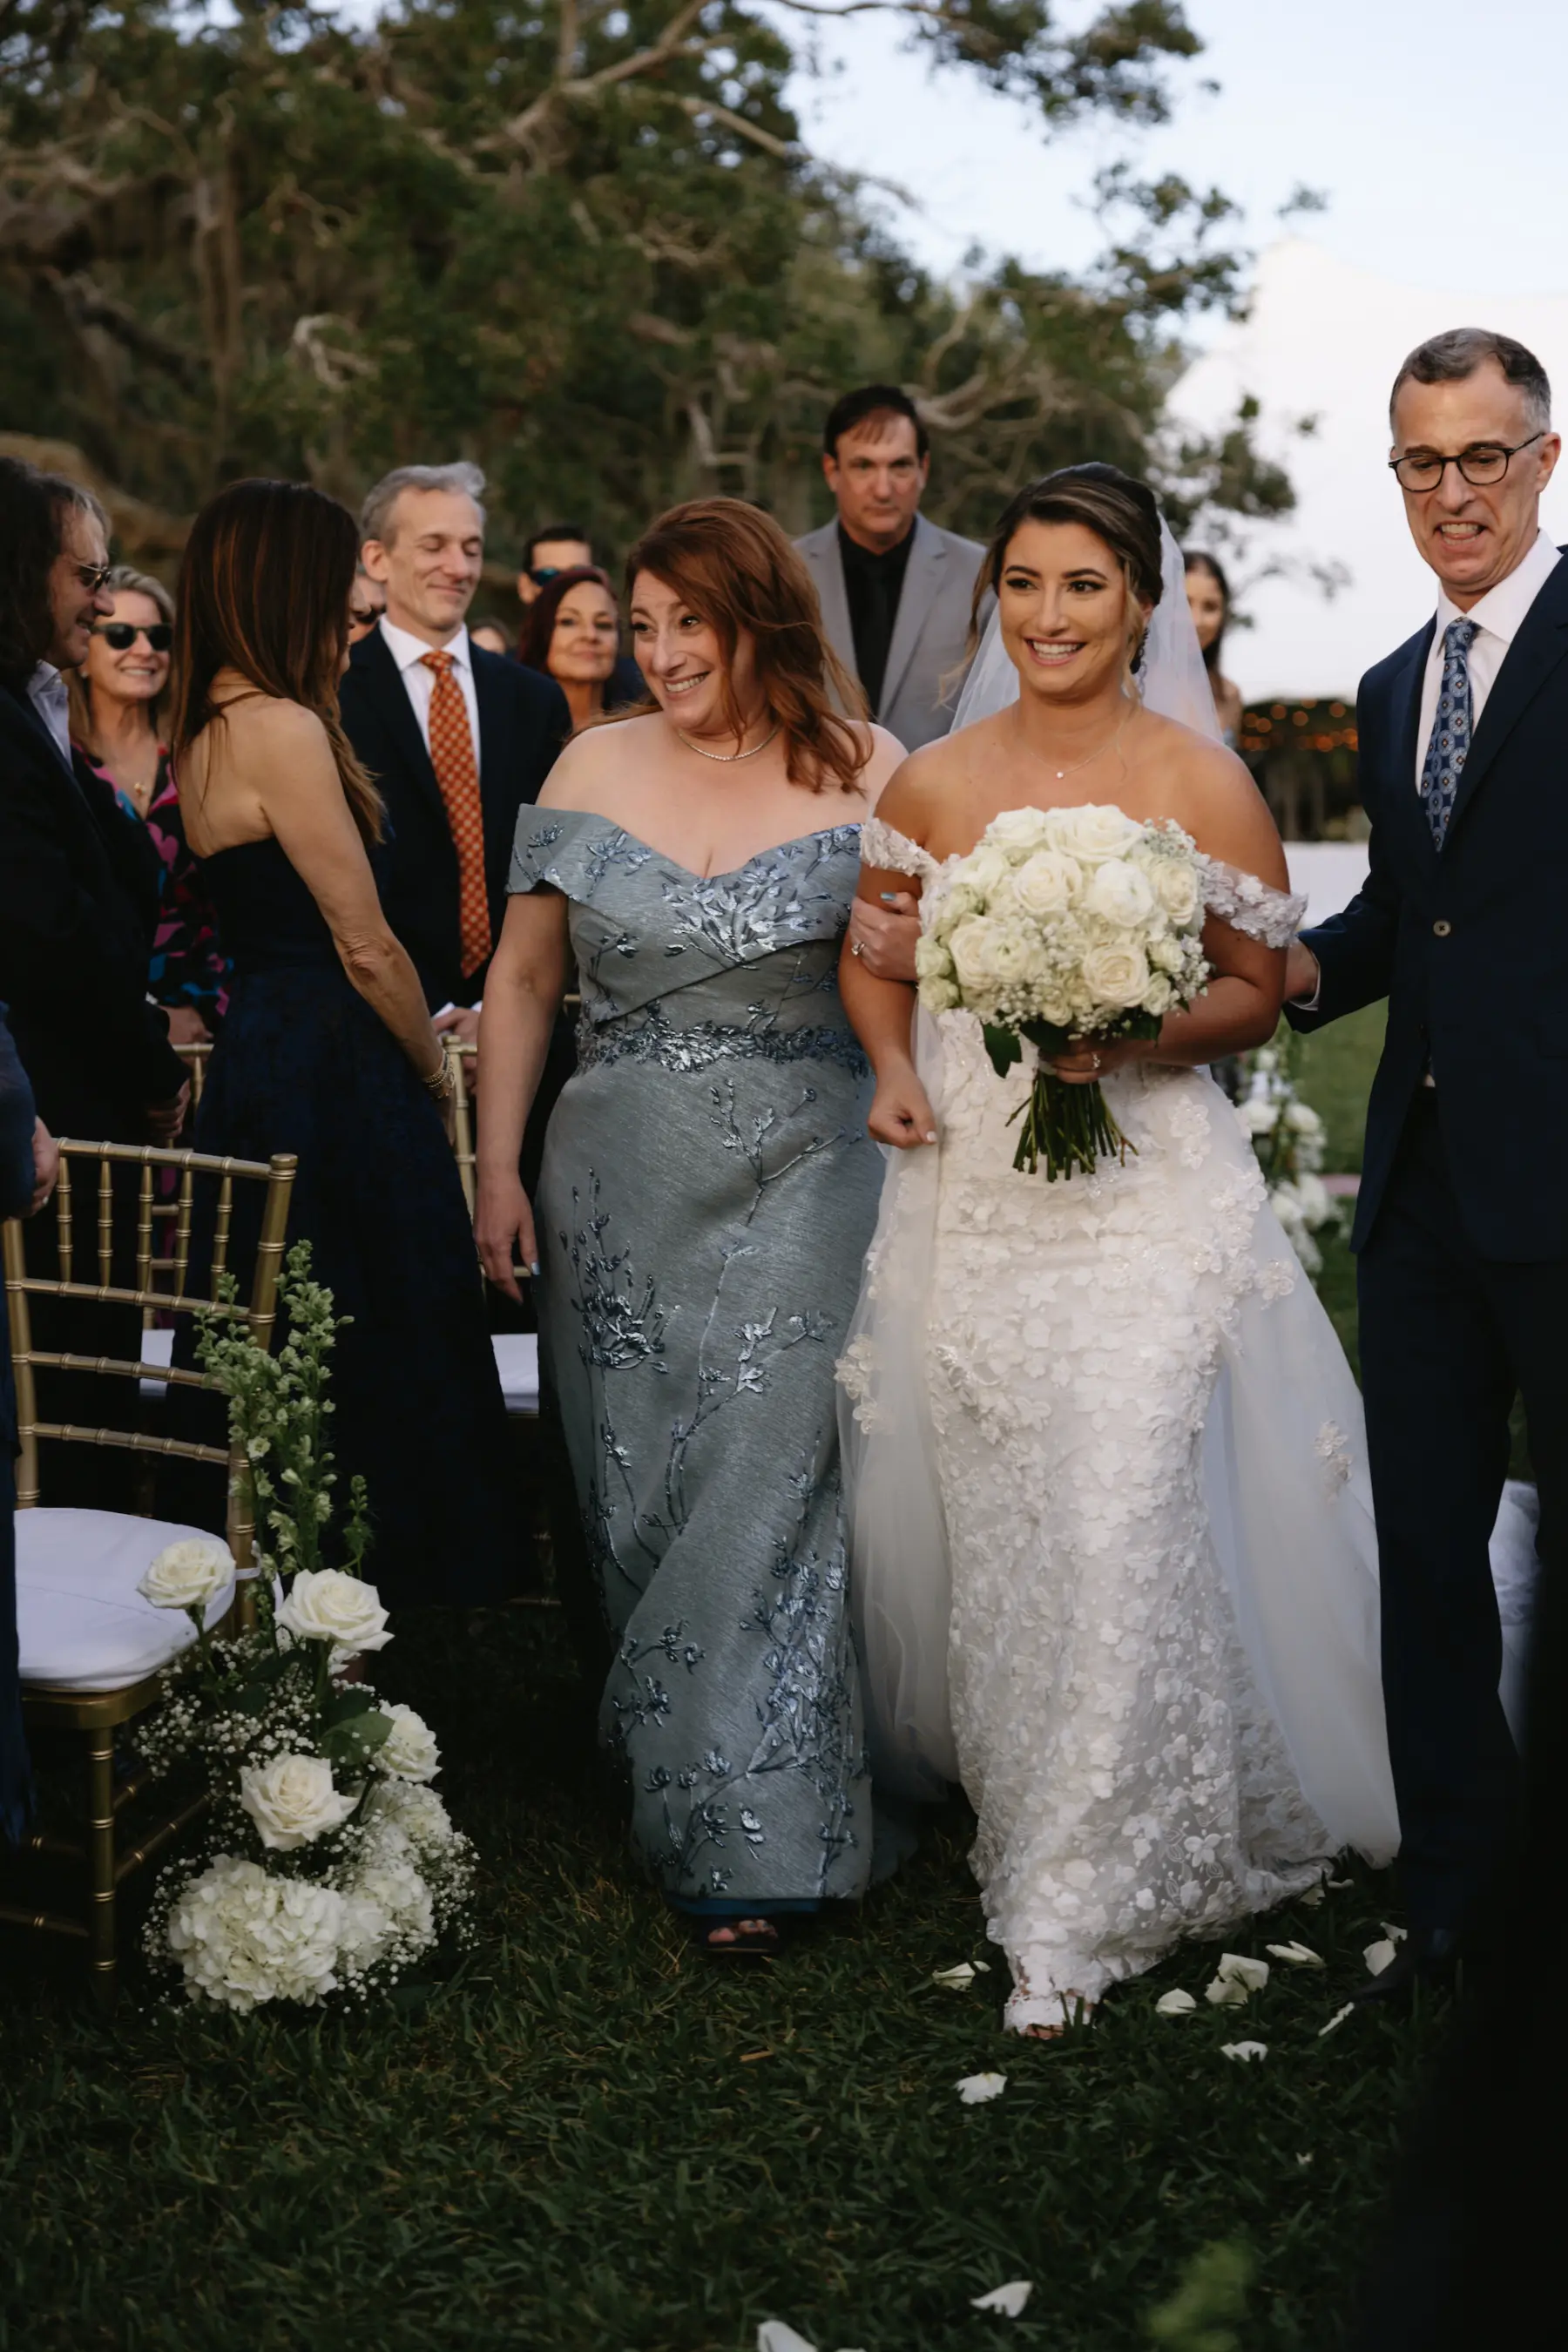 Bride with Mother and Father Walking Down Wedding Aisle